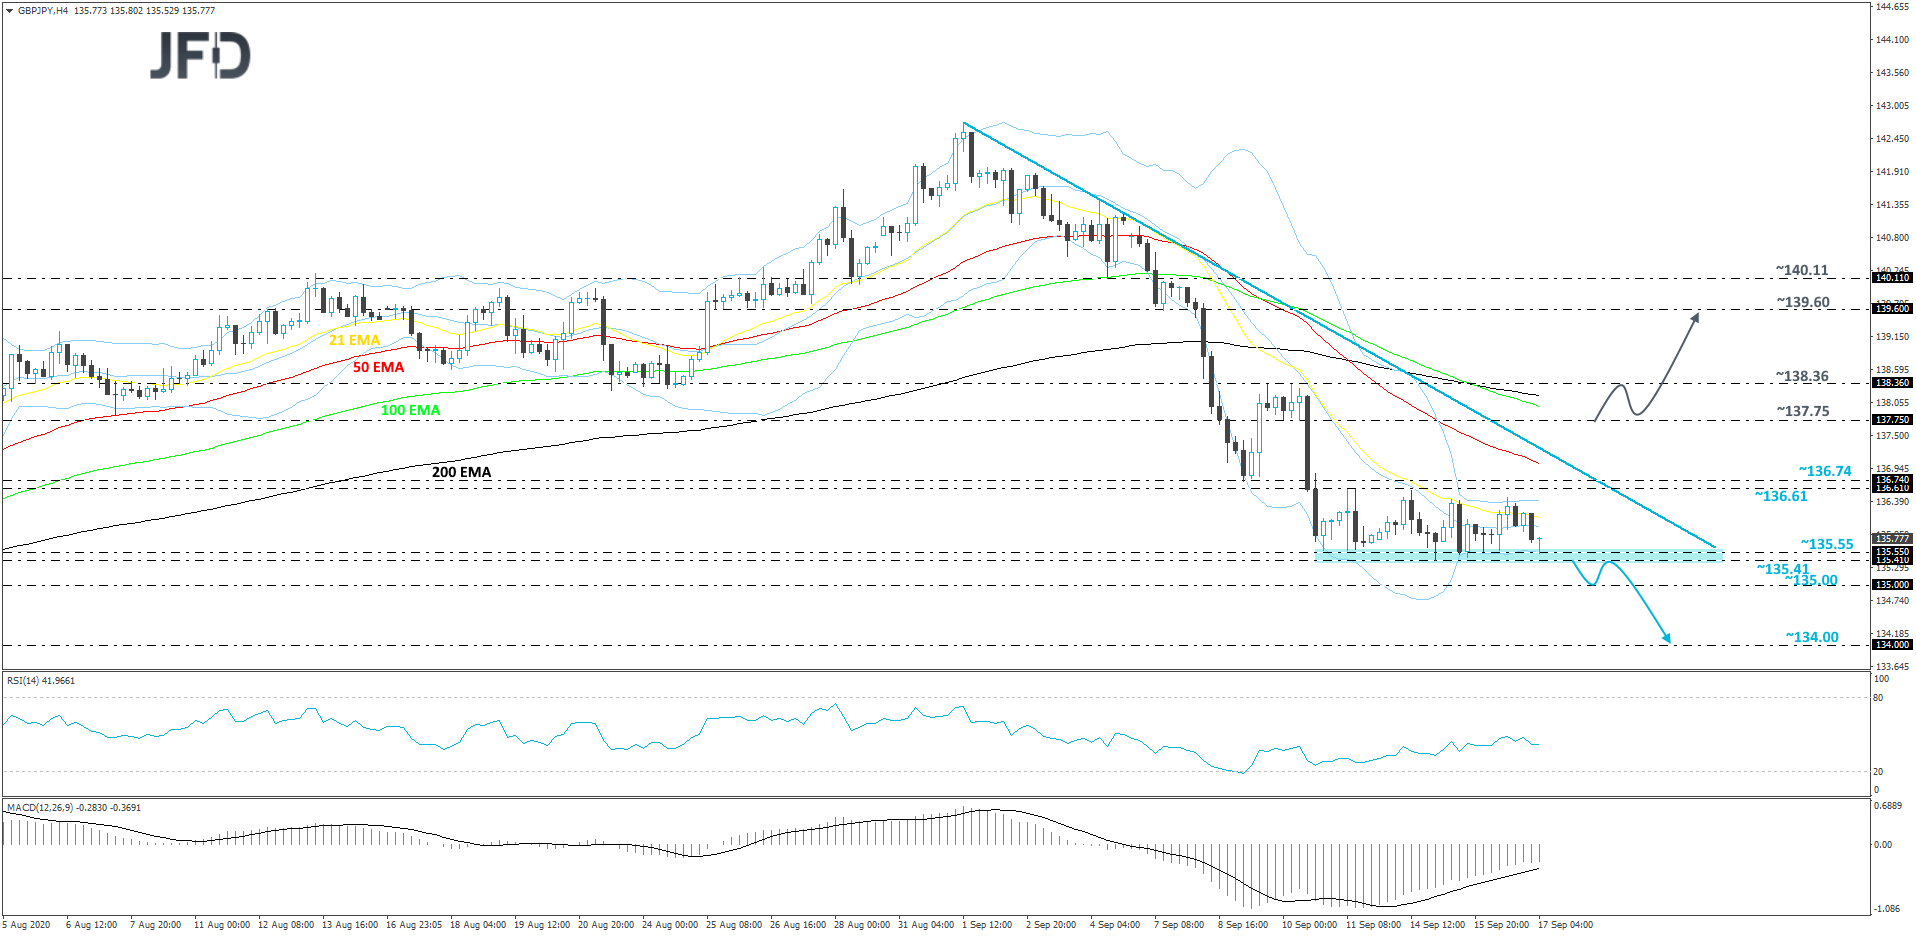 GBP/JPY 4-hour chart technical analysis